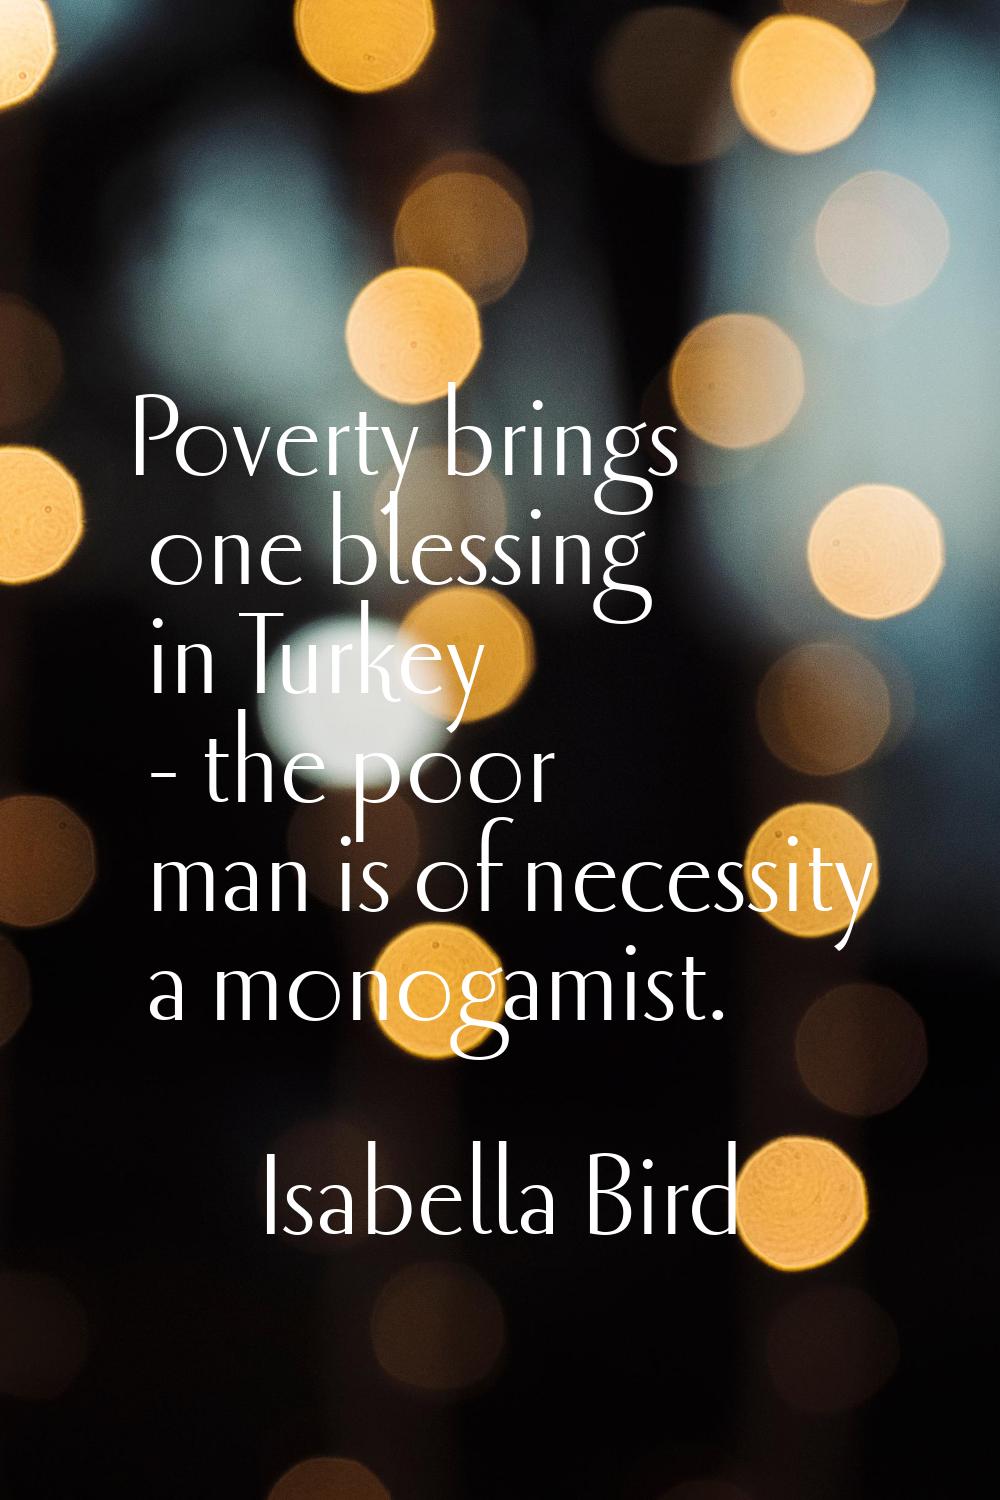 Poverty brings one blessing in Turkey - the poor man is of necessity a monogamist.